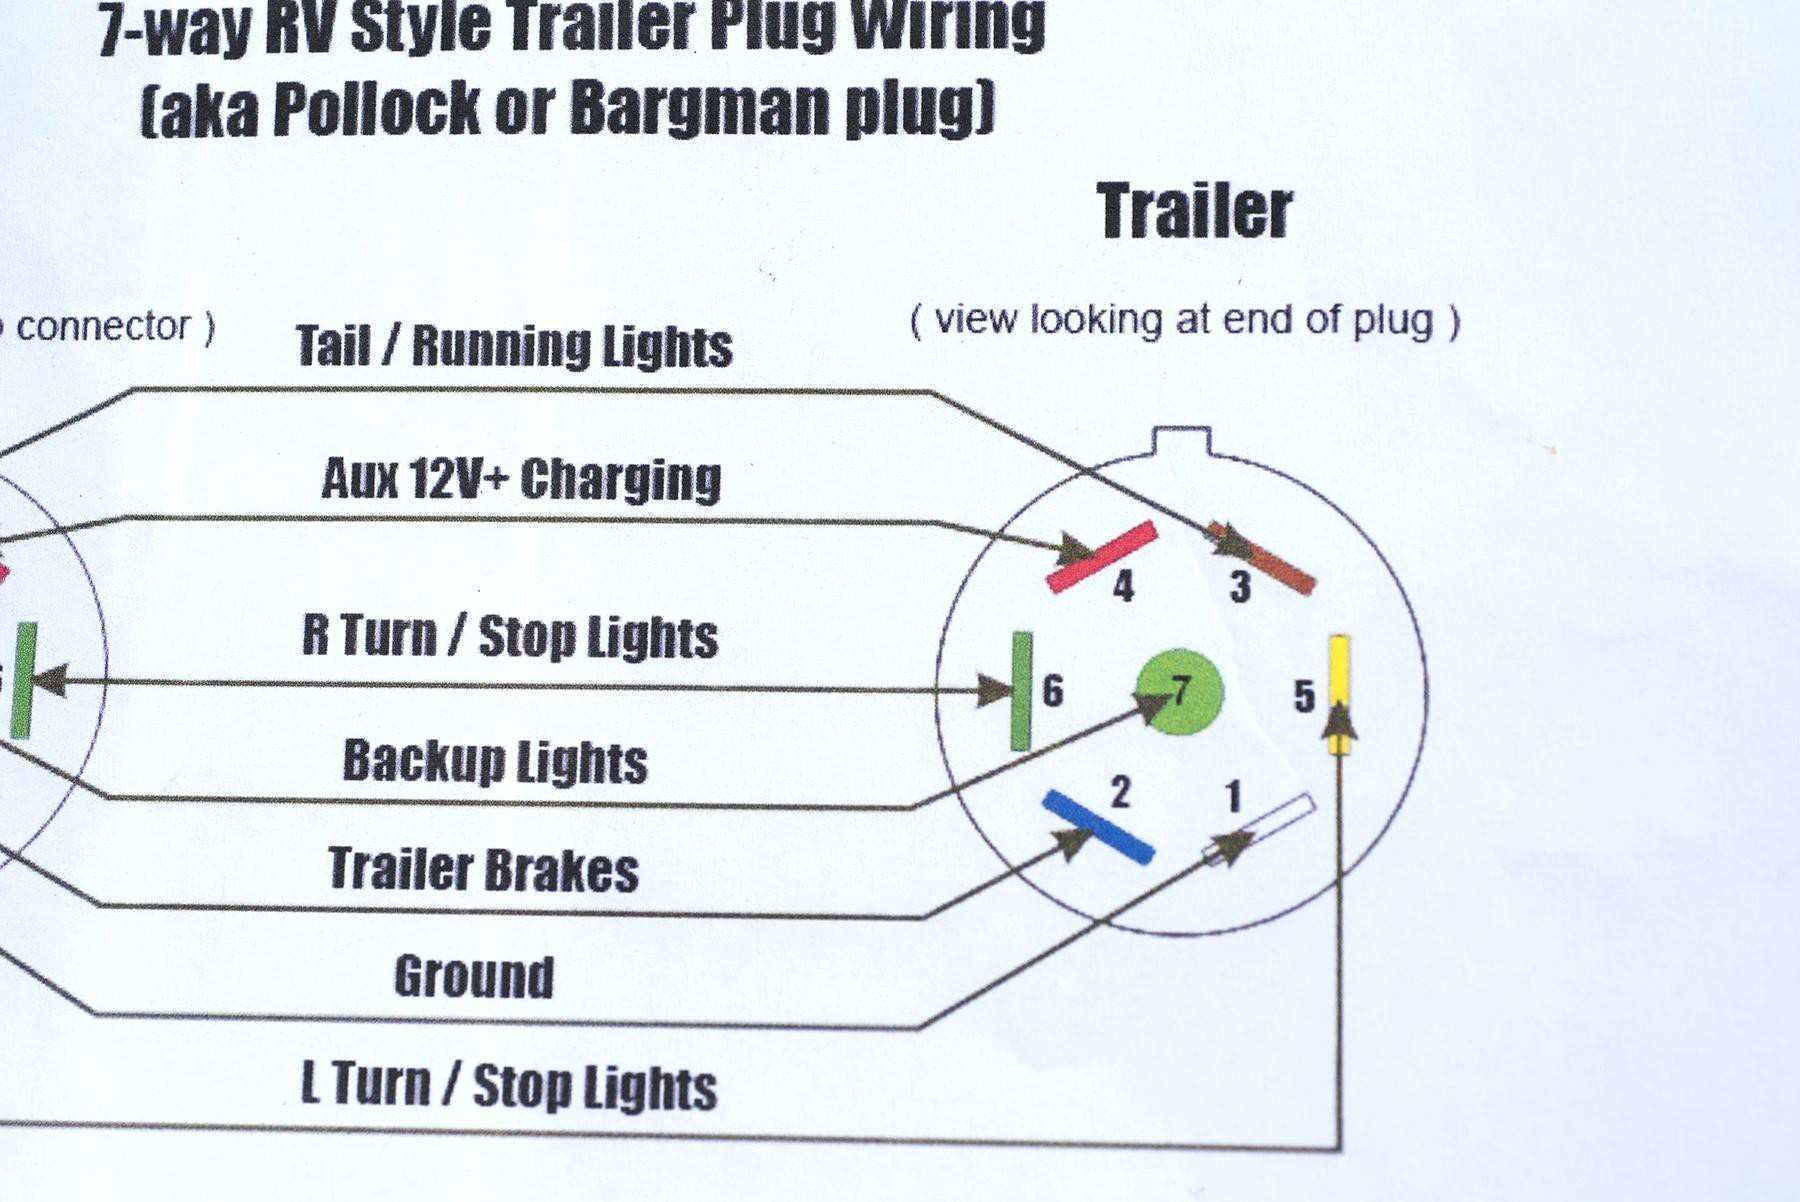 Used Gooseneck Trailers Wiring Harness On Boxes | Wiring Diagram - Gooseneck Trailer Wiring Diagram